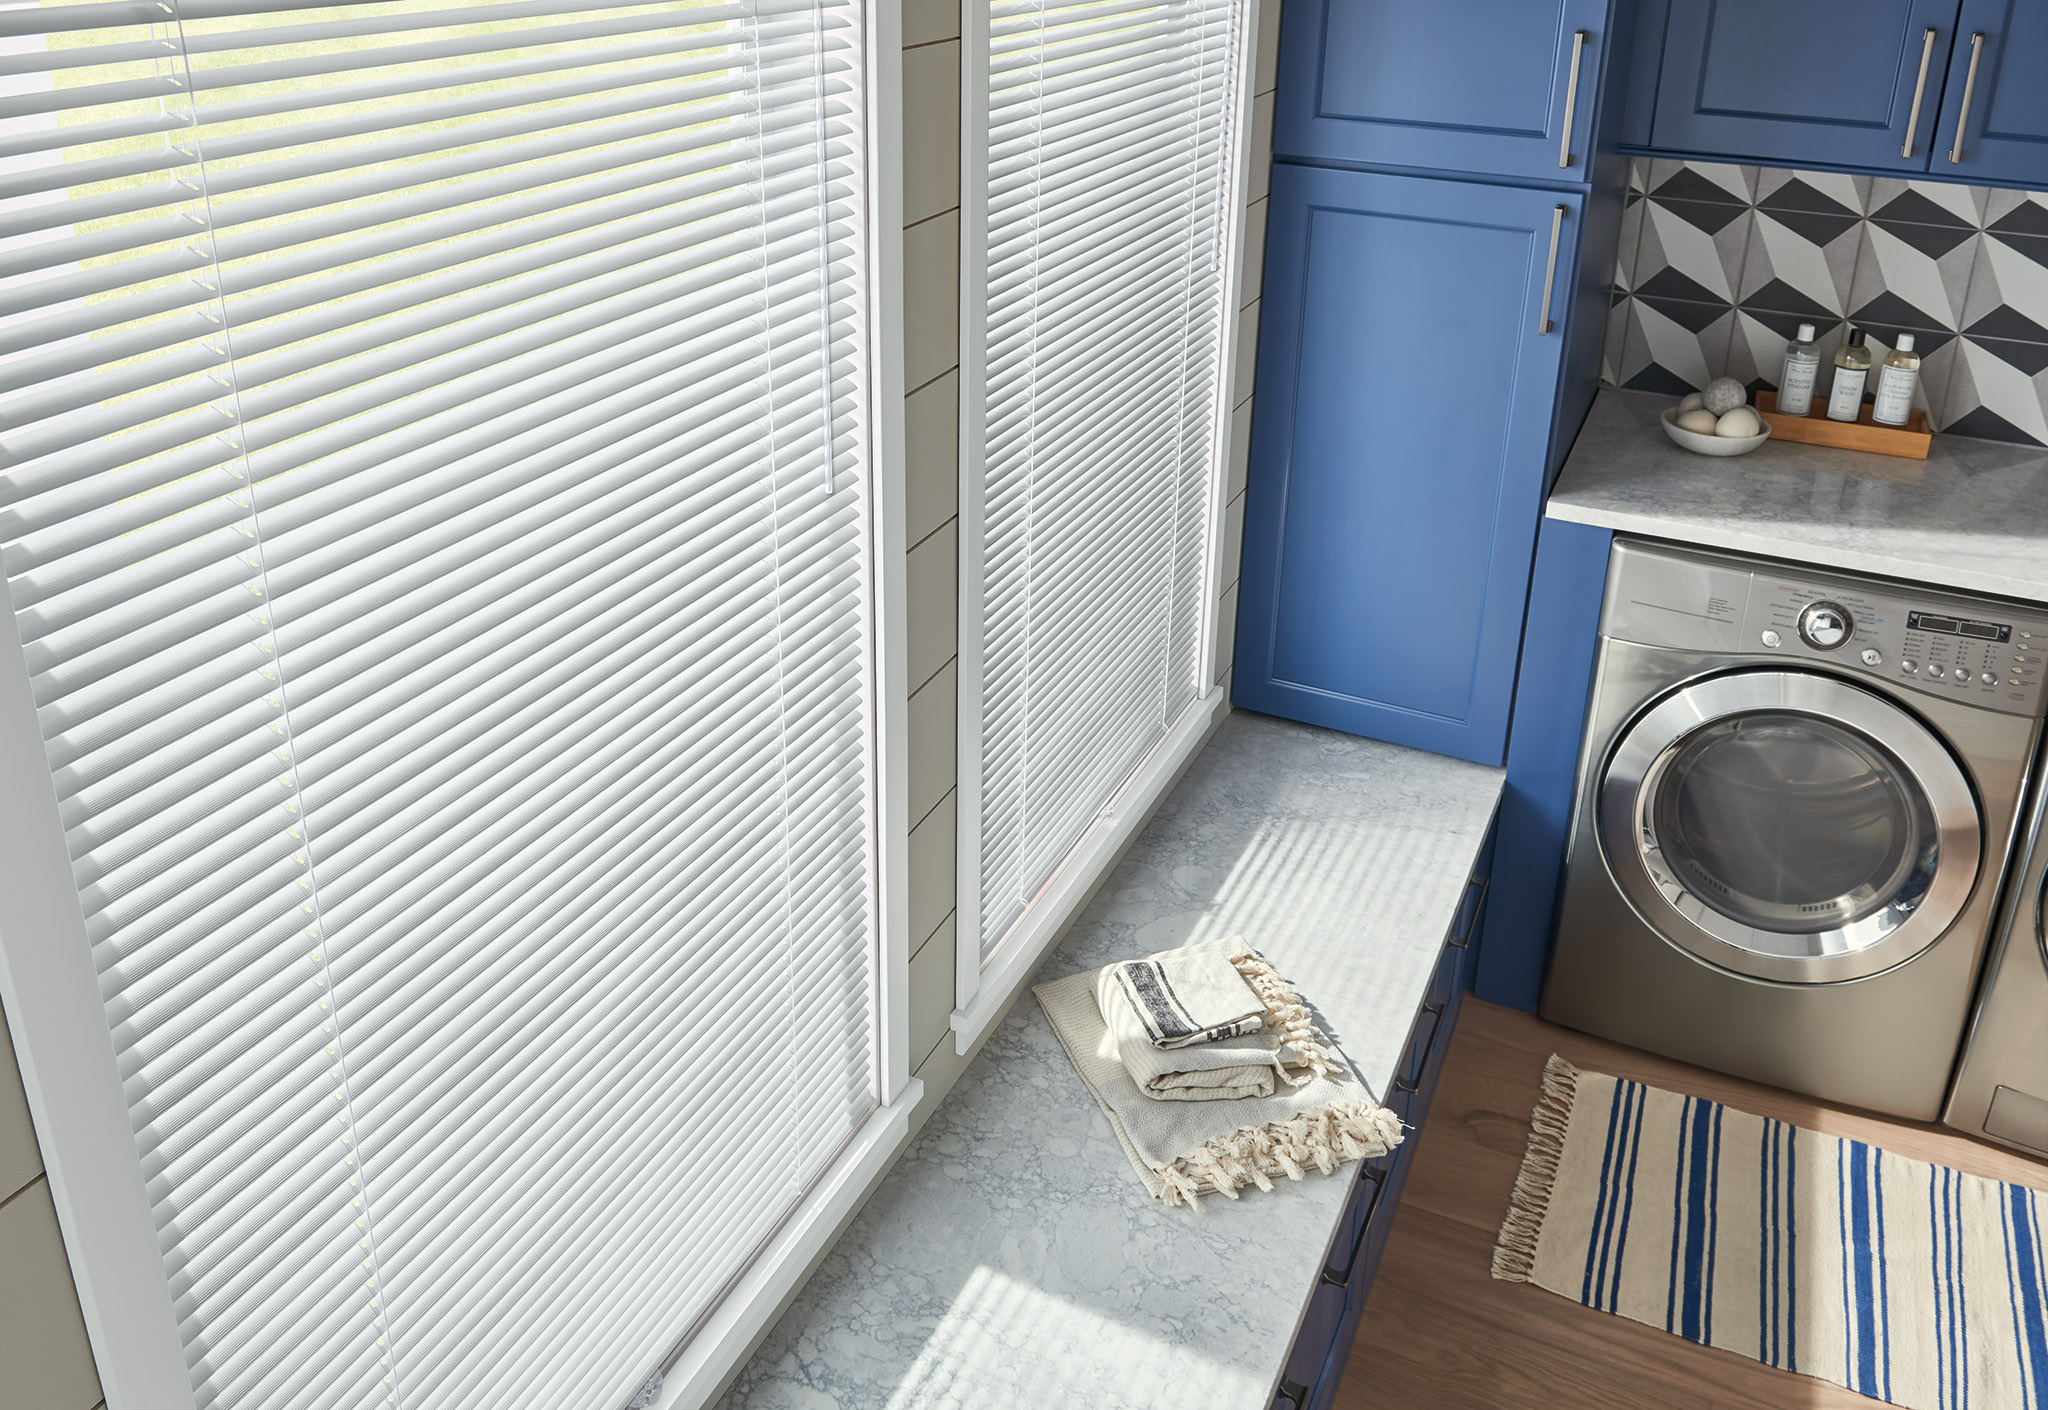 image of laundry room with safe window treatments